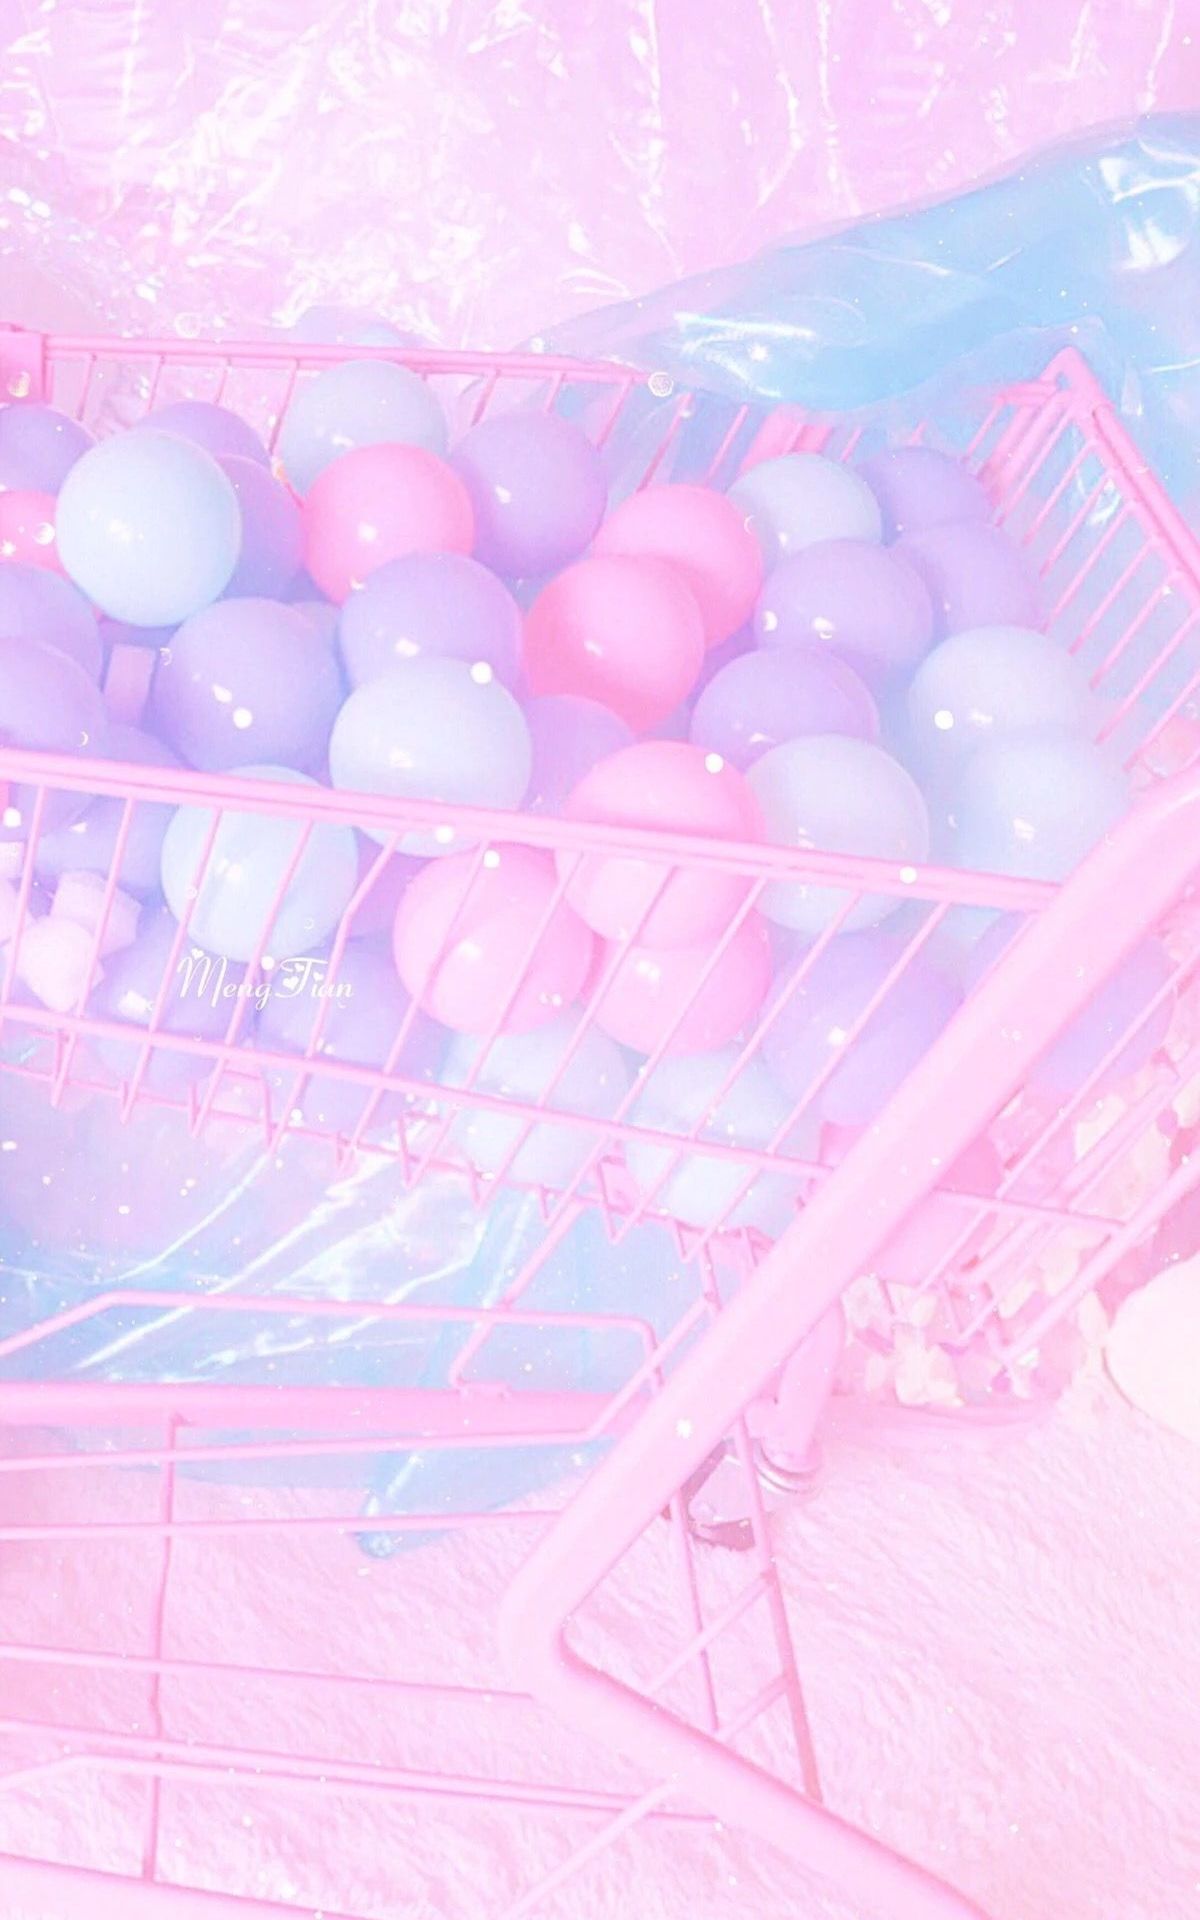 A shopping cart filled with balloons in pink - Pastel purple